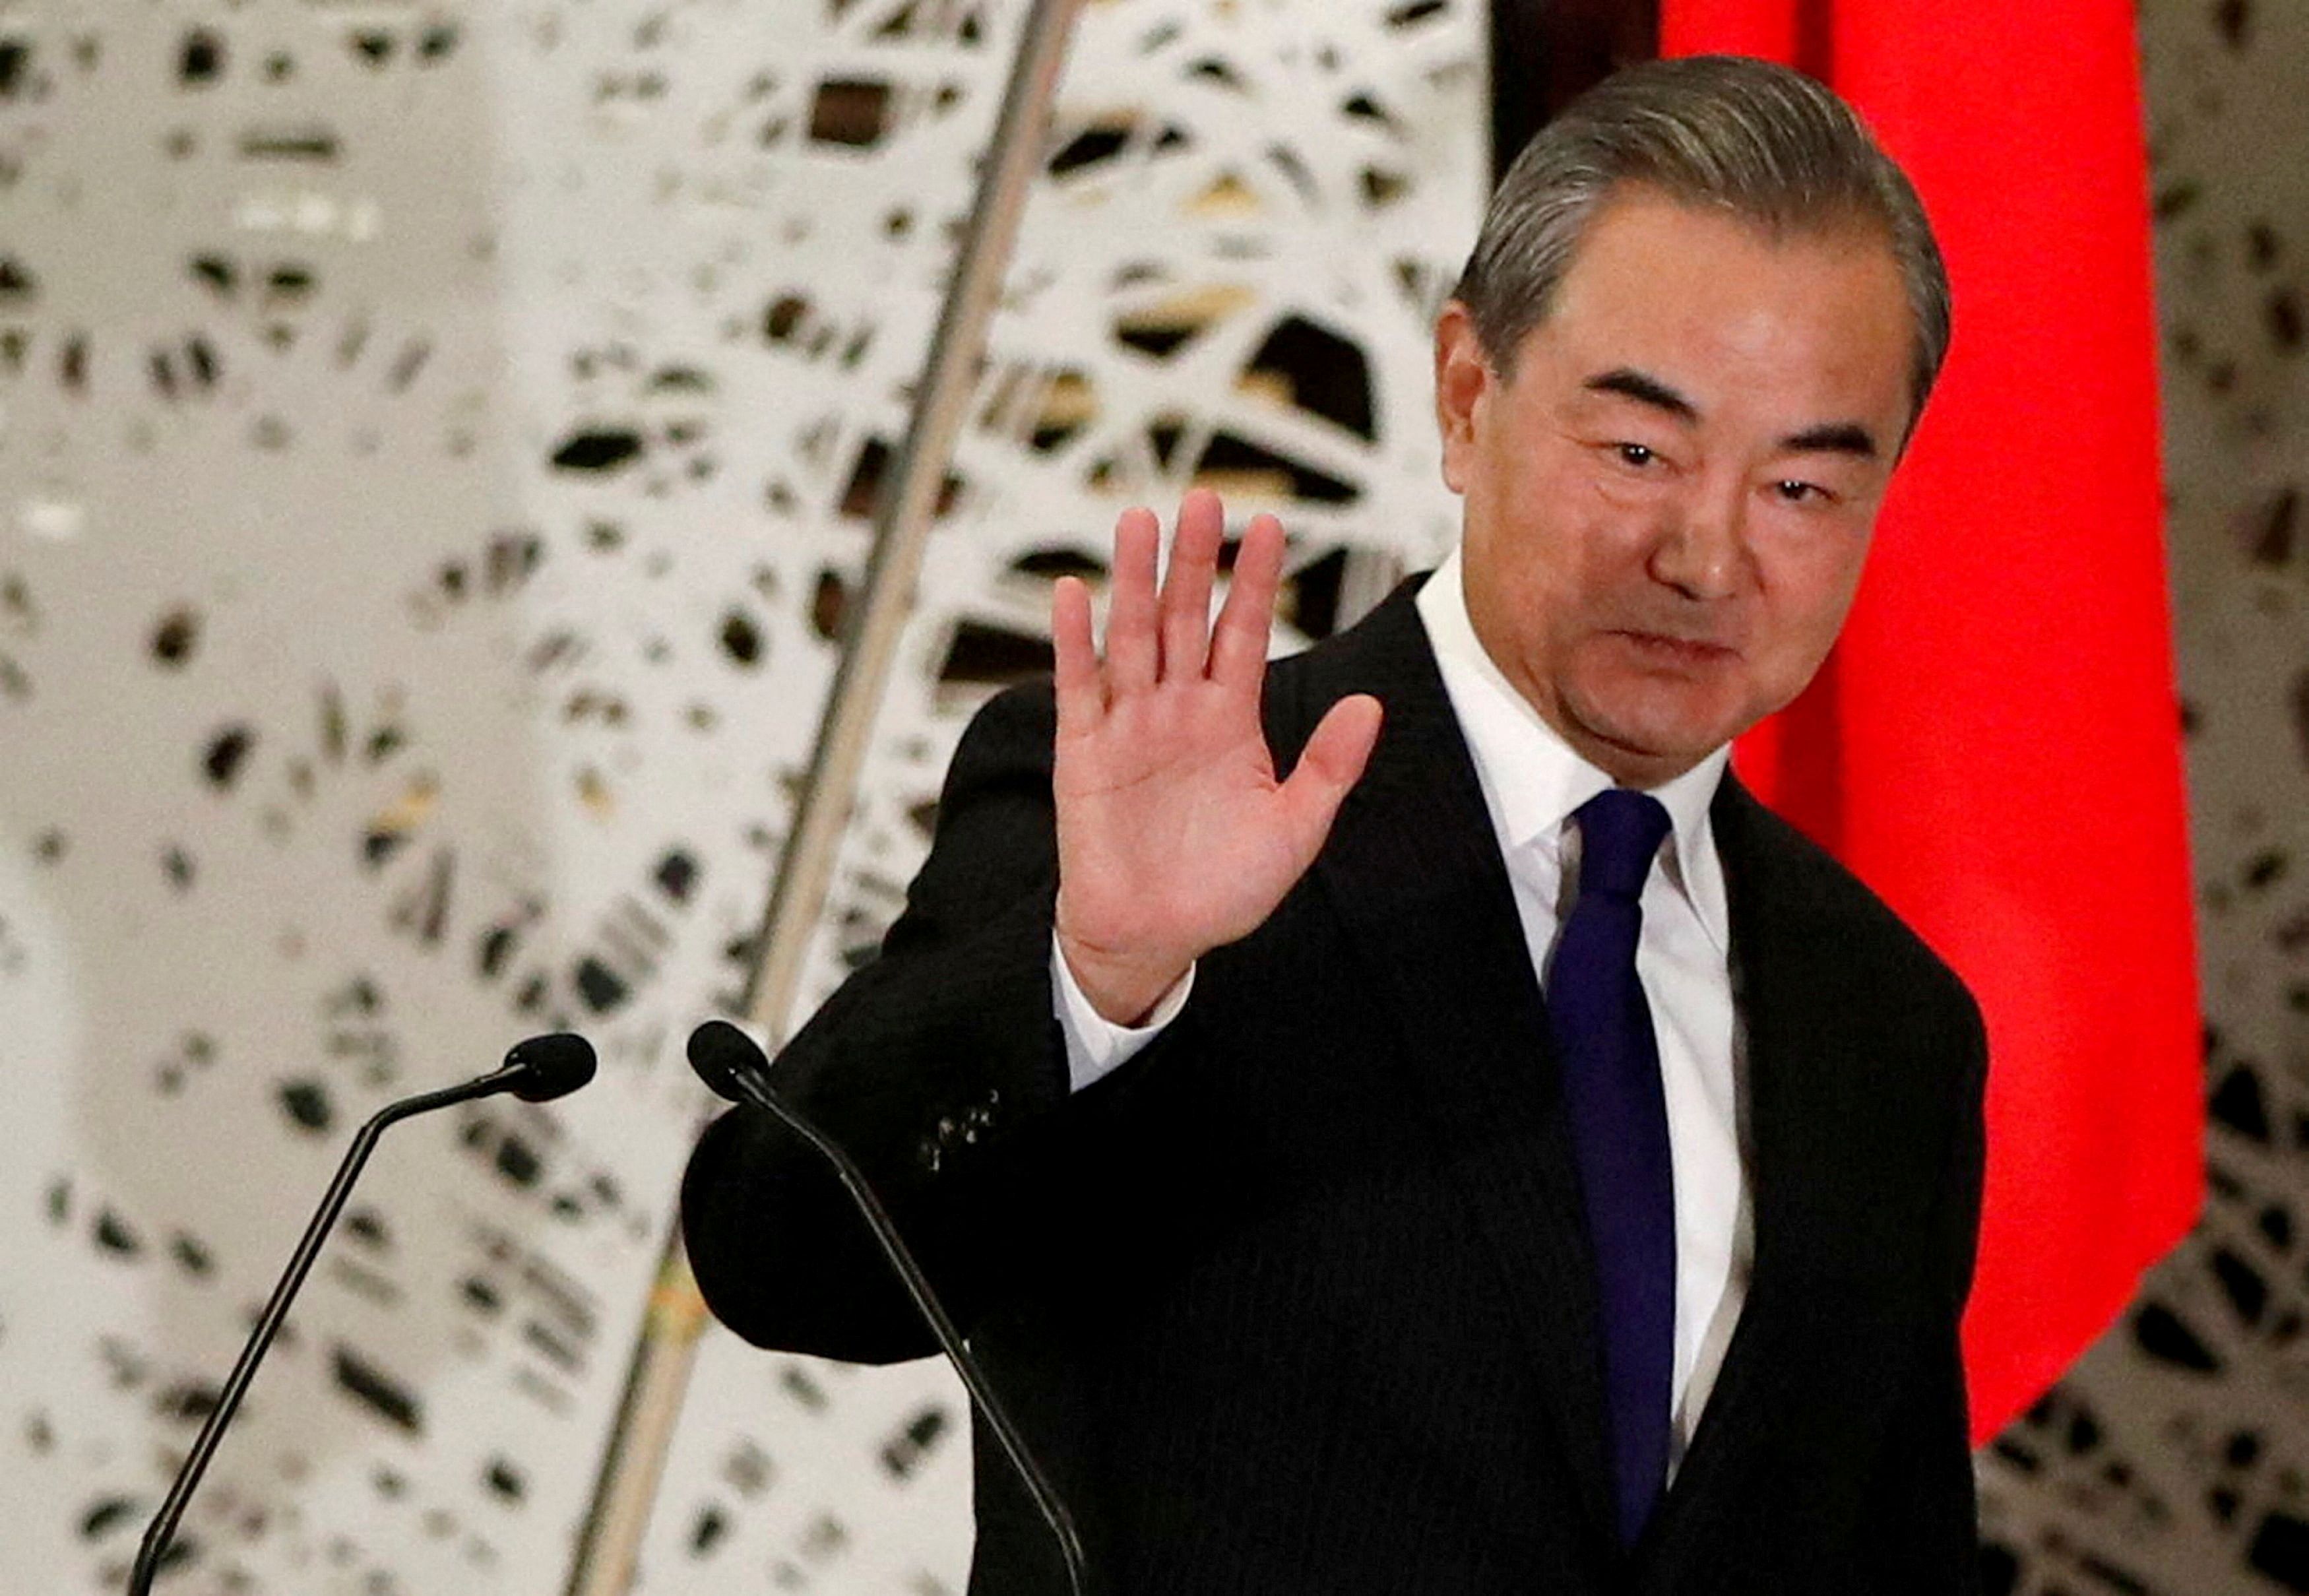 China's Wang Yi, state councillor and foreign minister, waves as he leaves a news conference in Tokyo